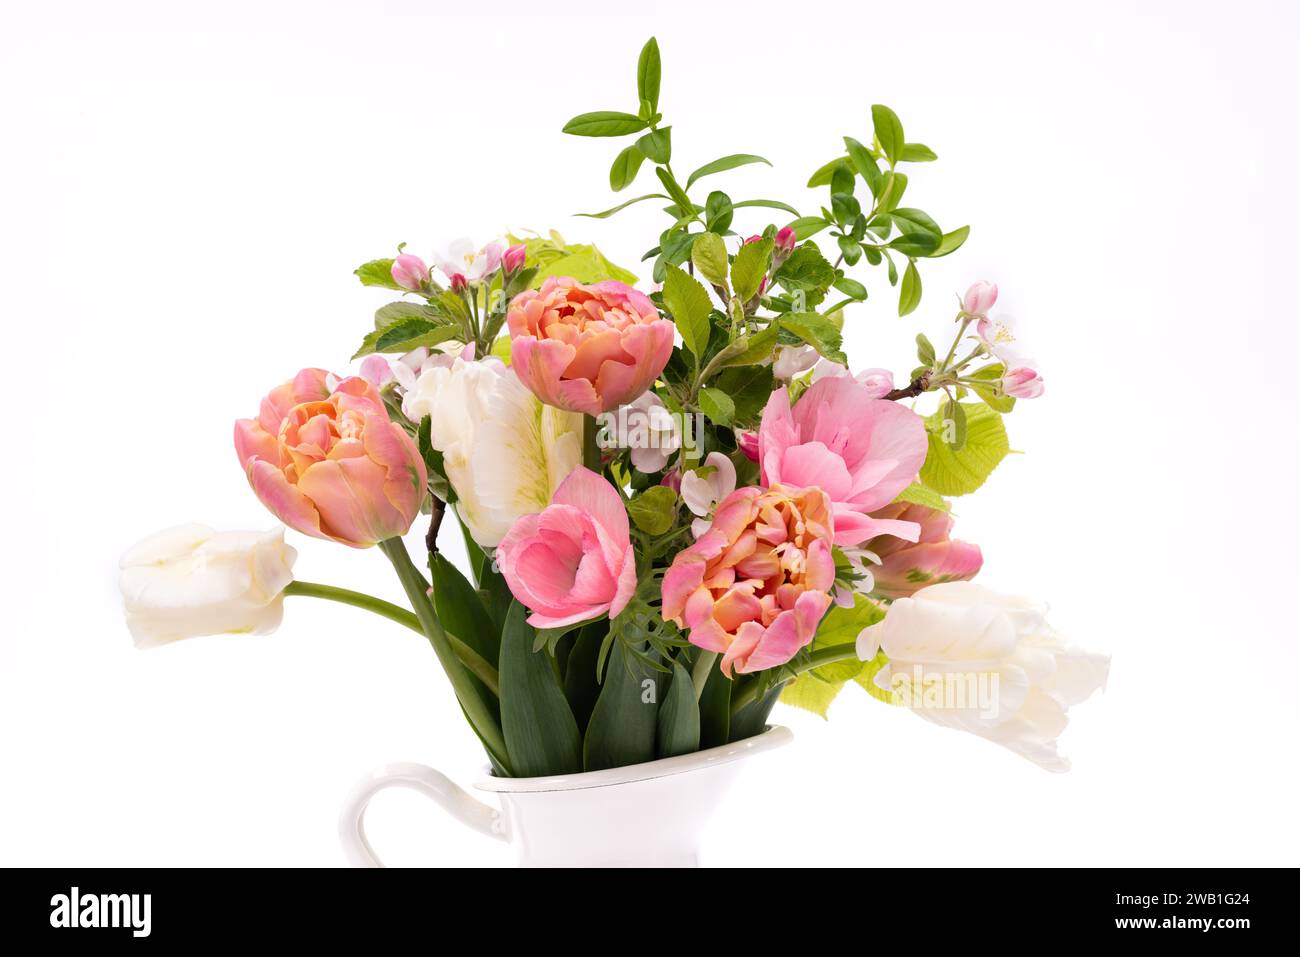 Elegant mixed pastel colored spring bouquet on white background. Spring tulips. Tulips bouquet. Stock Photo